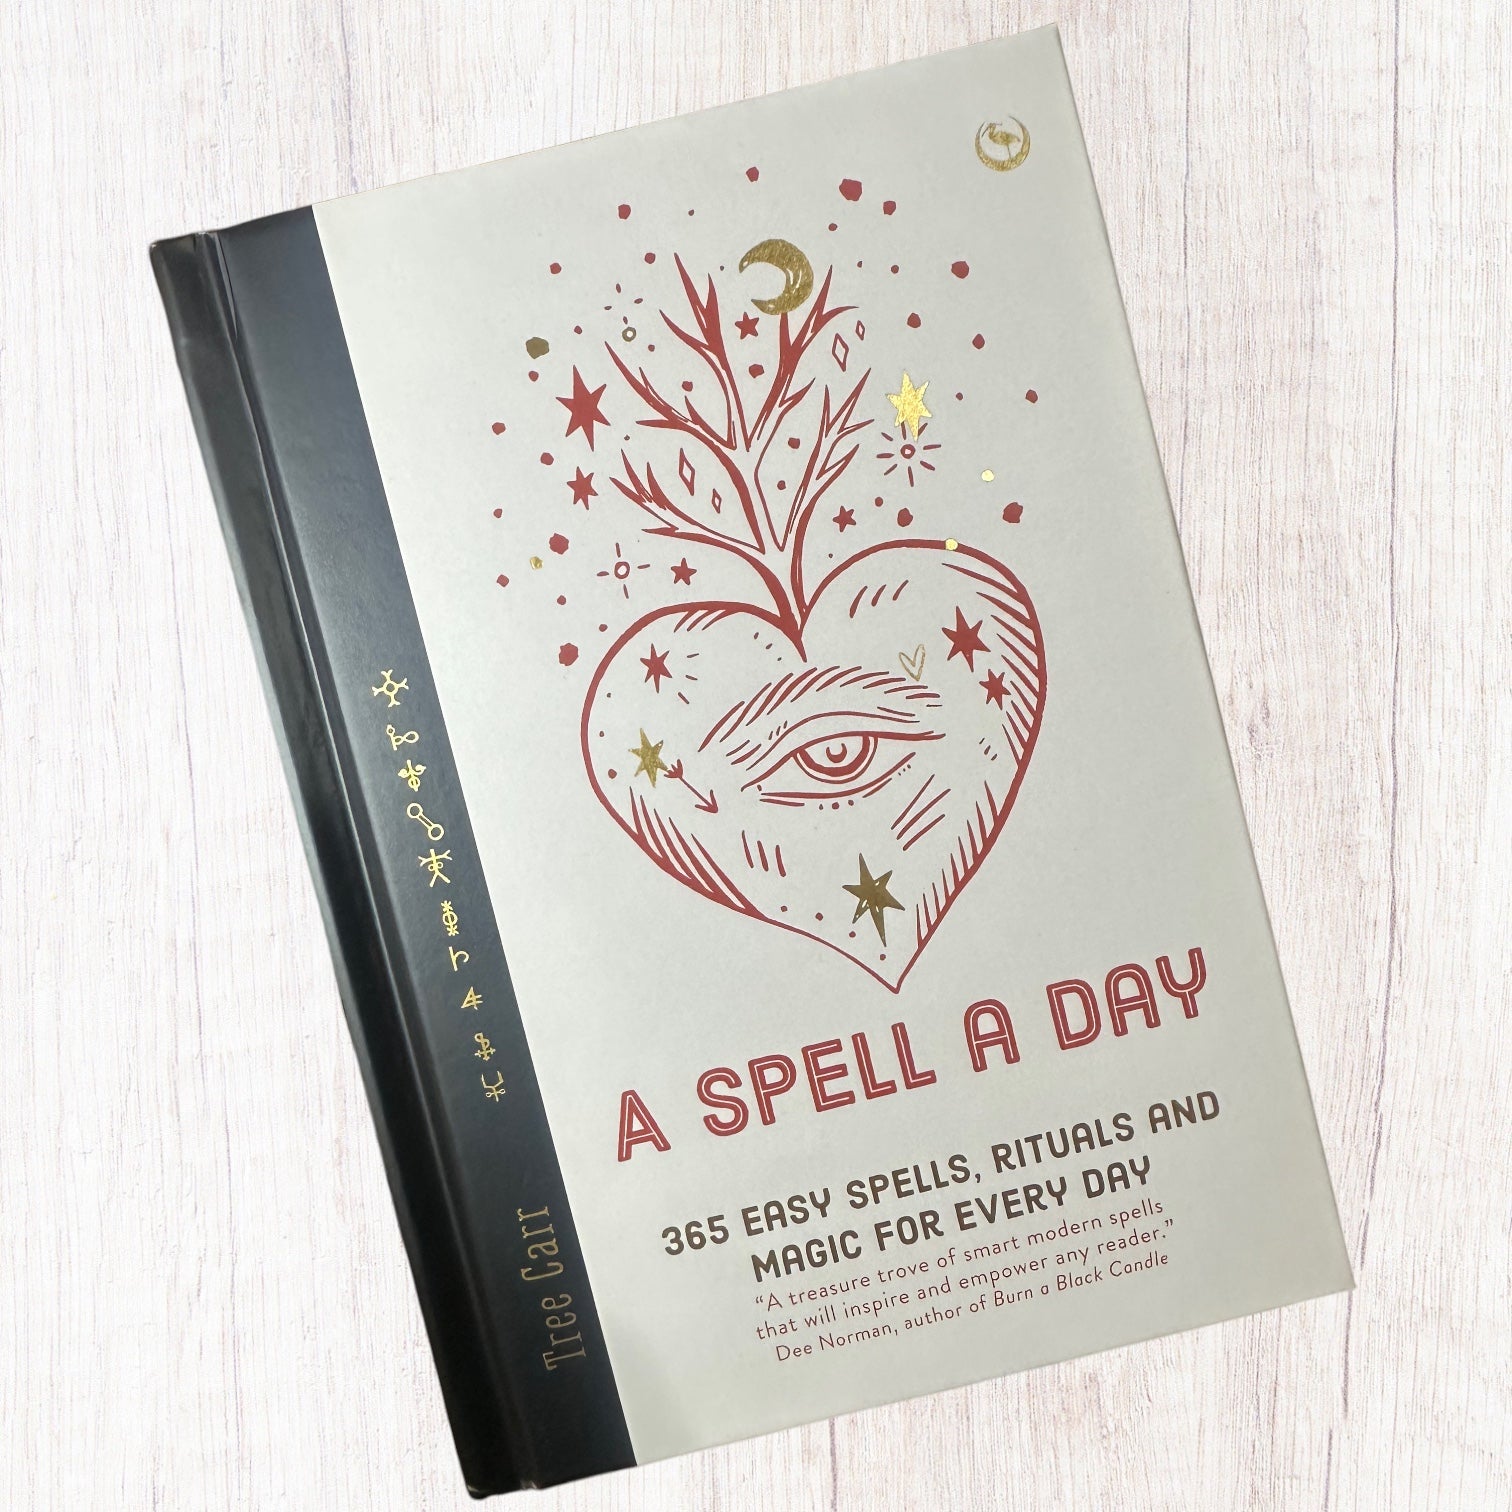 A Spell A Day: 365 Easy Spells, Rituals & Magic For Every Day – Sacred  Cherry